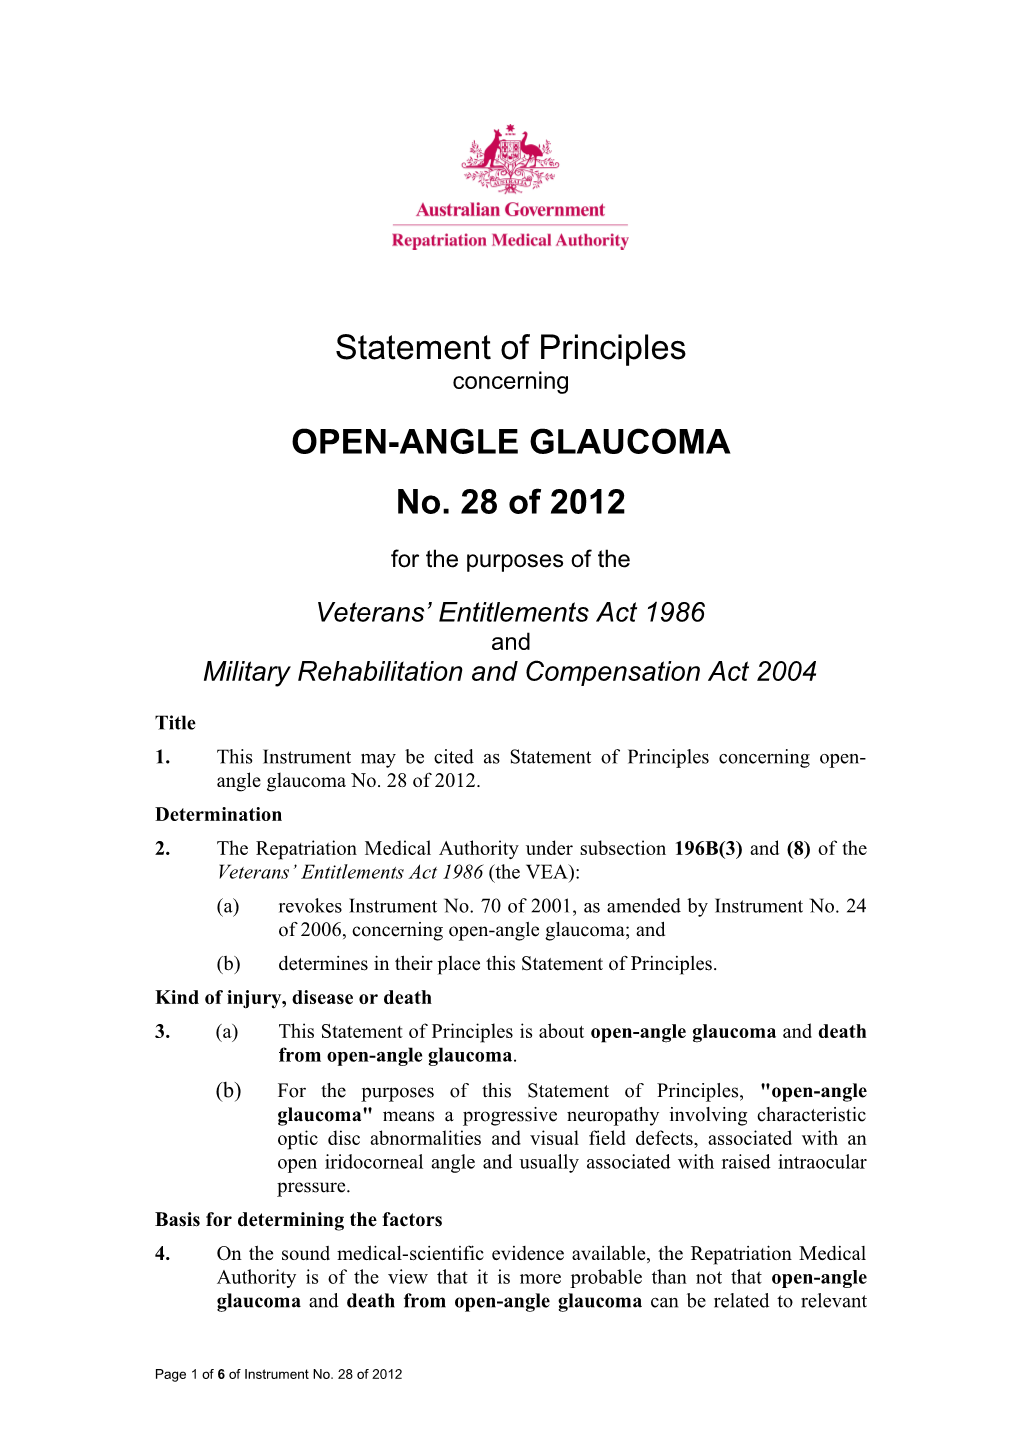 Statement of Principles 28 of 2012 Open-Angle Glaucoma Balance of Probabilities